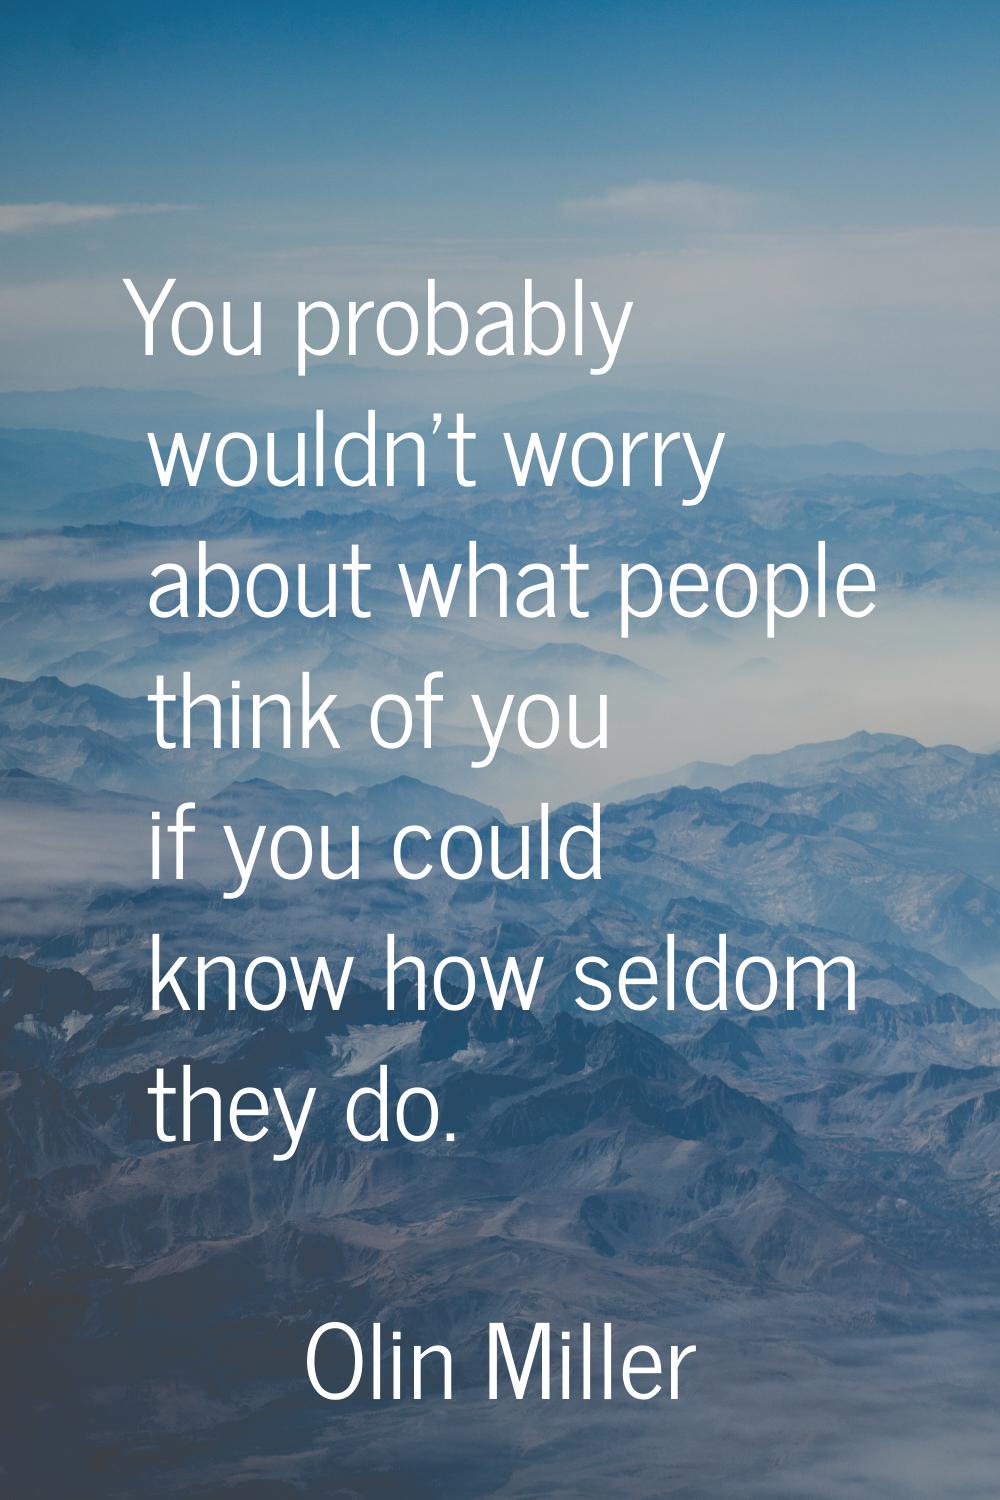 You probably wouldn't worry about what people think of you if you could know how seldom they do.